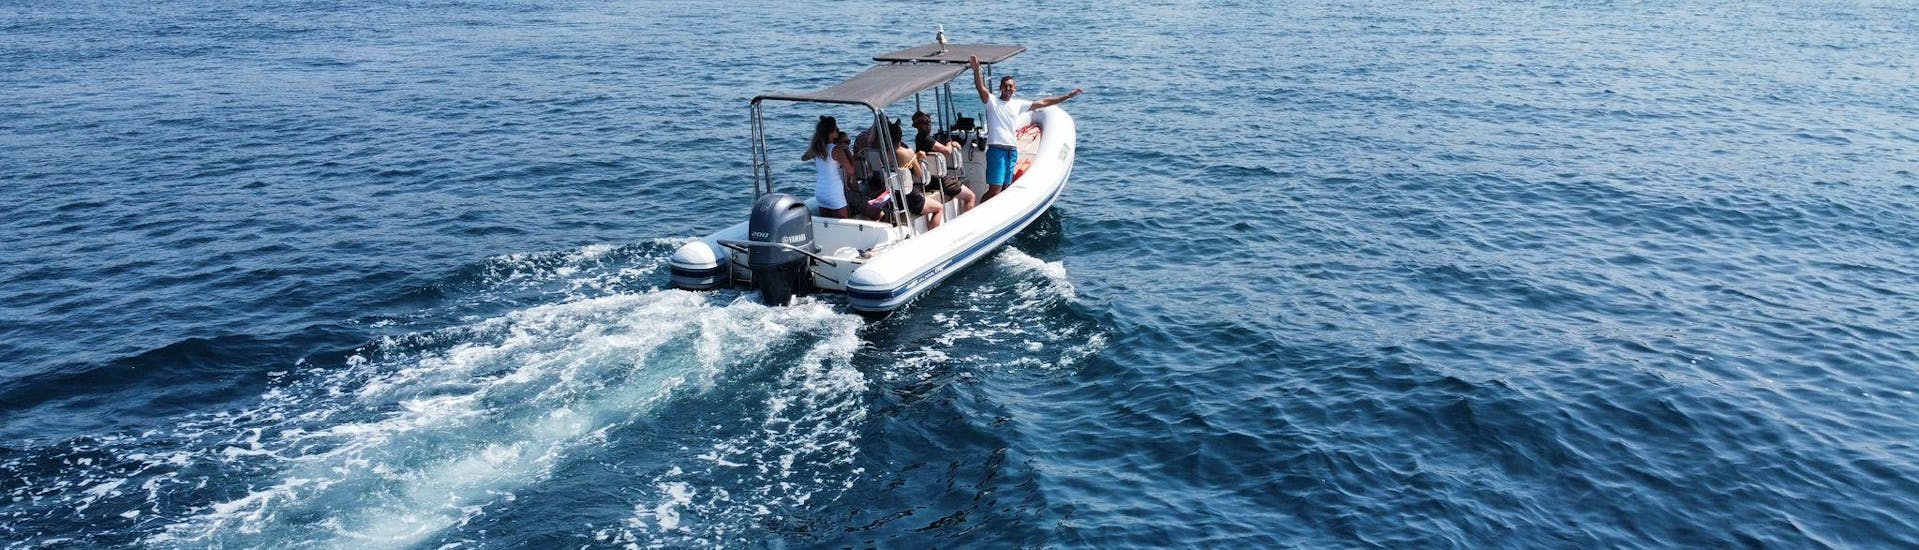 One of the speedboats used during the tours of Adria Tours Vodice.